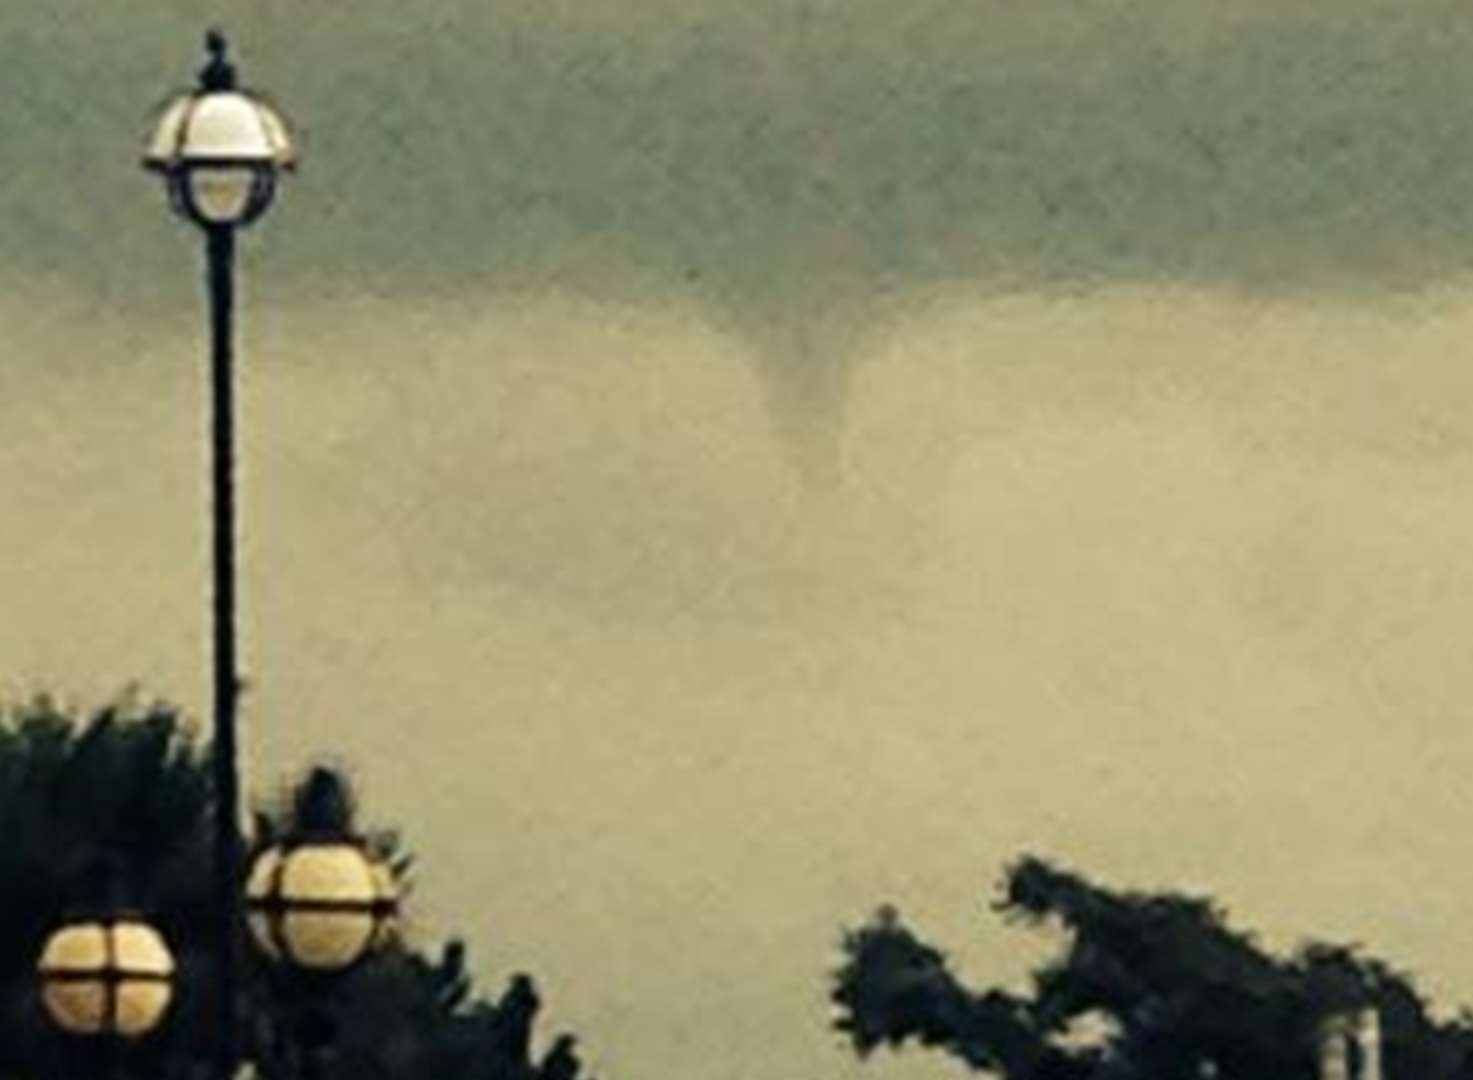 Another tornado spotted forming over Kent